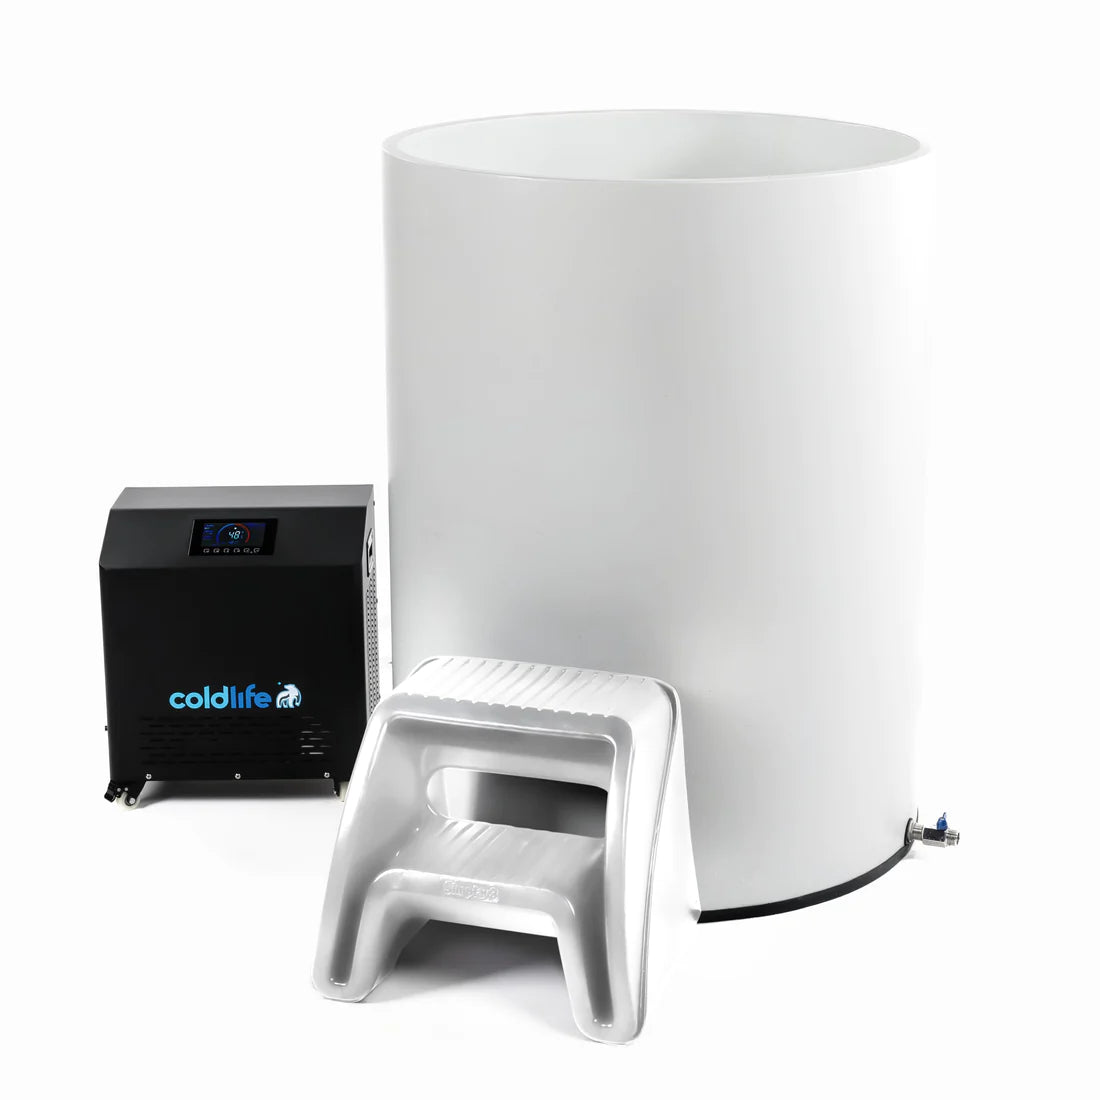 The Cold Life - Cold Plunge and Water Chiller Bundle - Ice Bath For Home